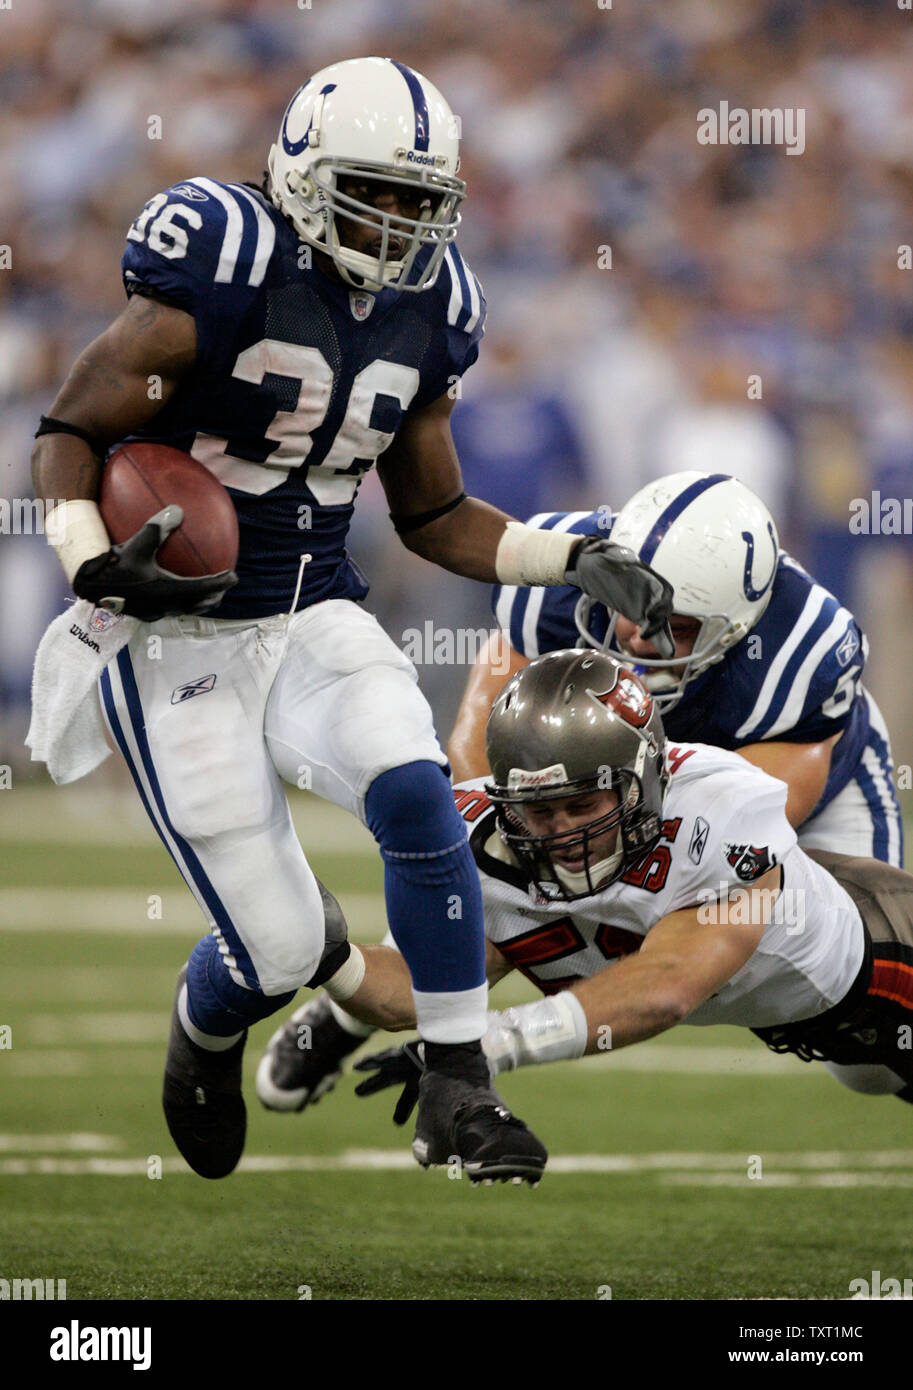 Indianapolis Colts running back Kenton Keith (36) leaps past Tampa Bay Buccaneers linebacker Barrett Rudd (51) as he is blocked by Colts center Jeff Saturday (63) in the fourth quarter at the RCA Dome in Indianapolis on October 7, 2007. The Colts defeated the Buccaneers 33-14 to remain undefeated on the season. (UPI Photo/Mark Cowan) Stock Photo